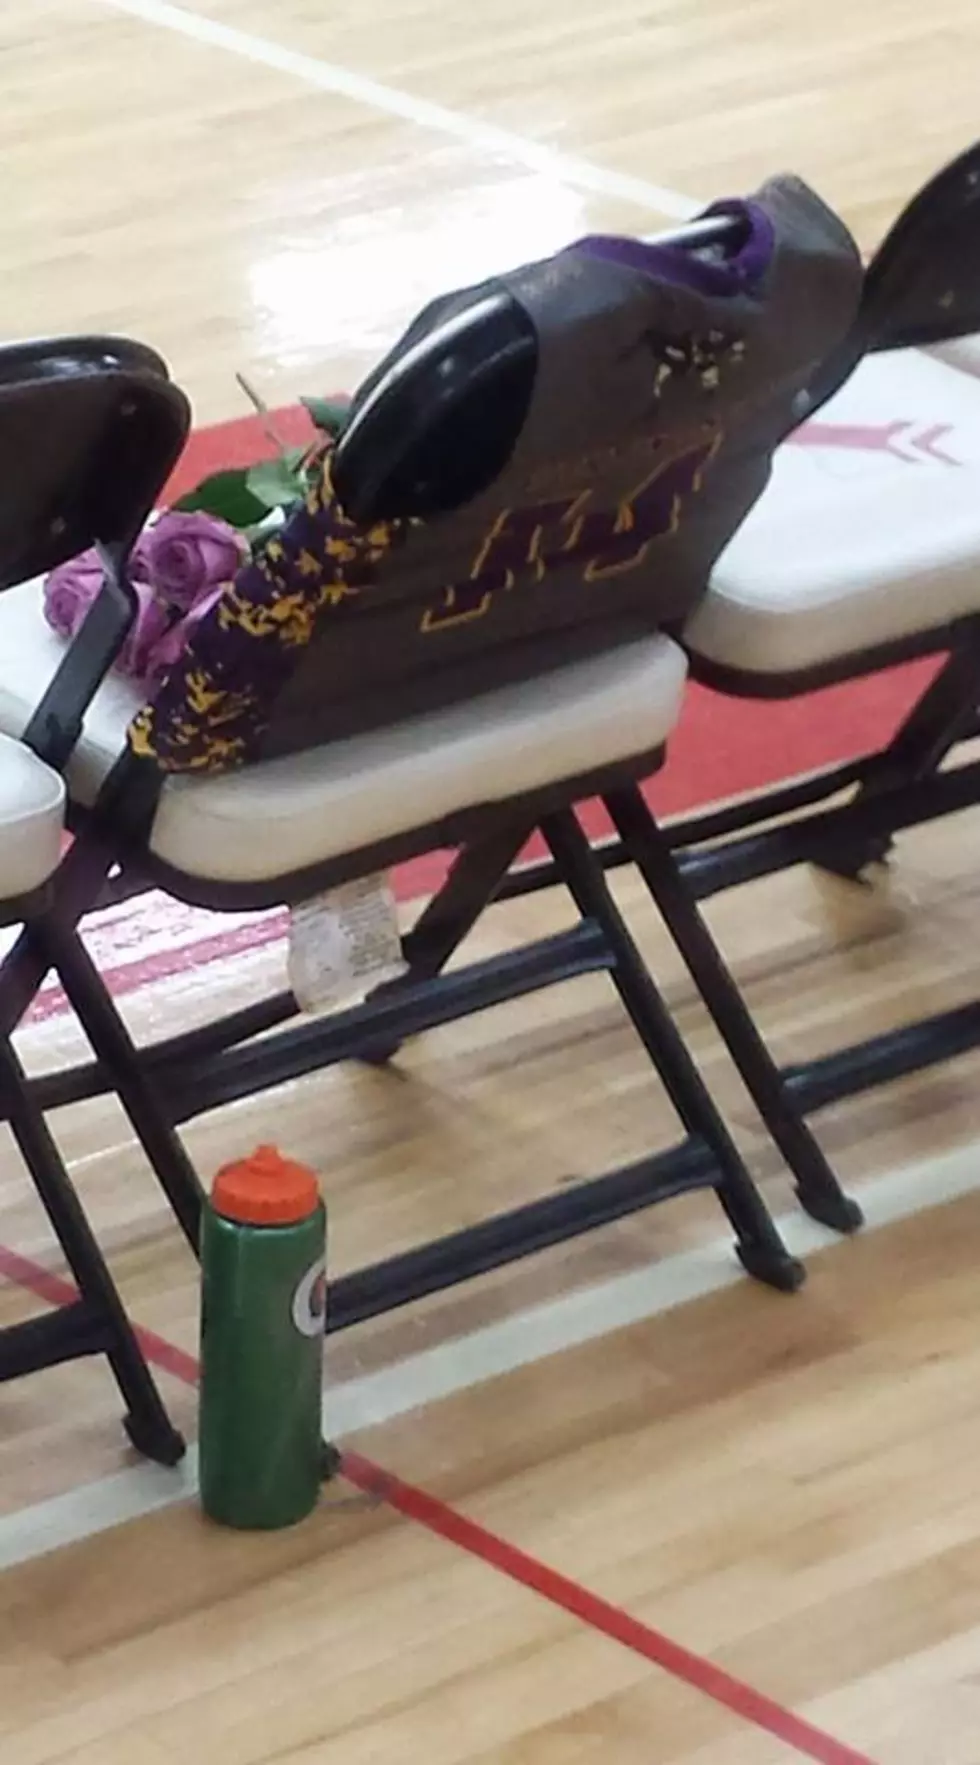 People Doing Good: Lowell Basketball Team Honors Caledonia Player In A Touching Gesture